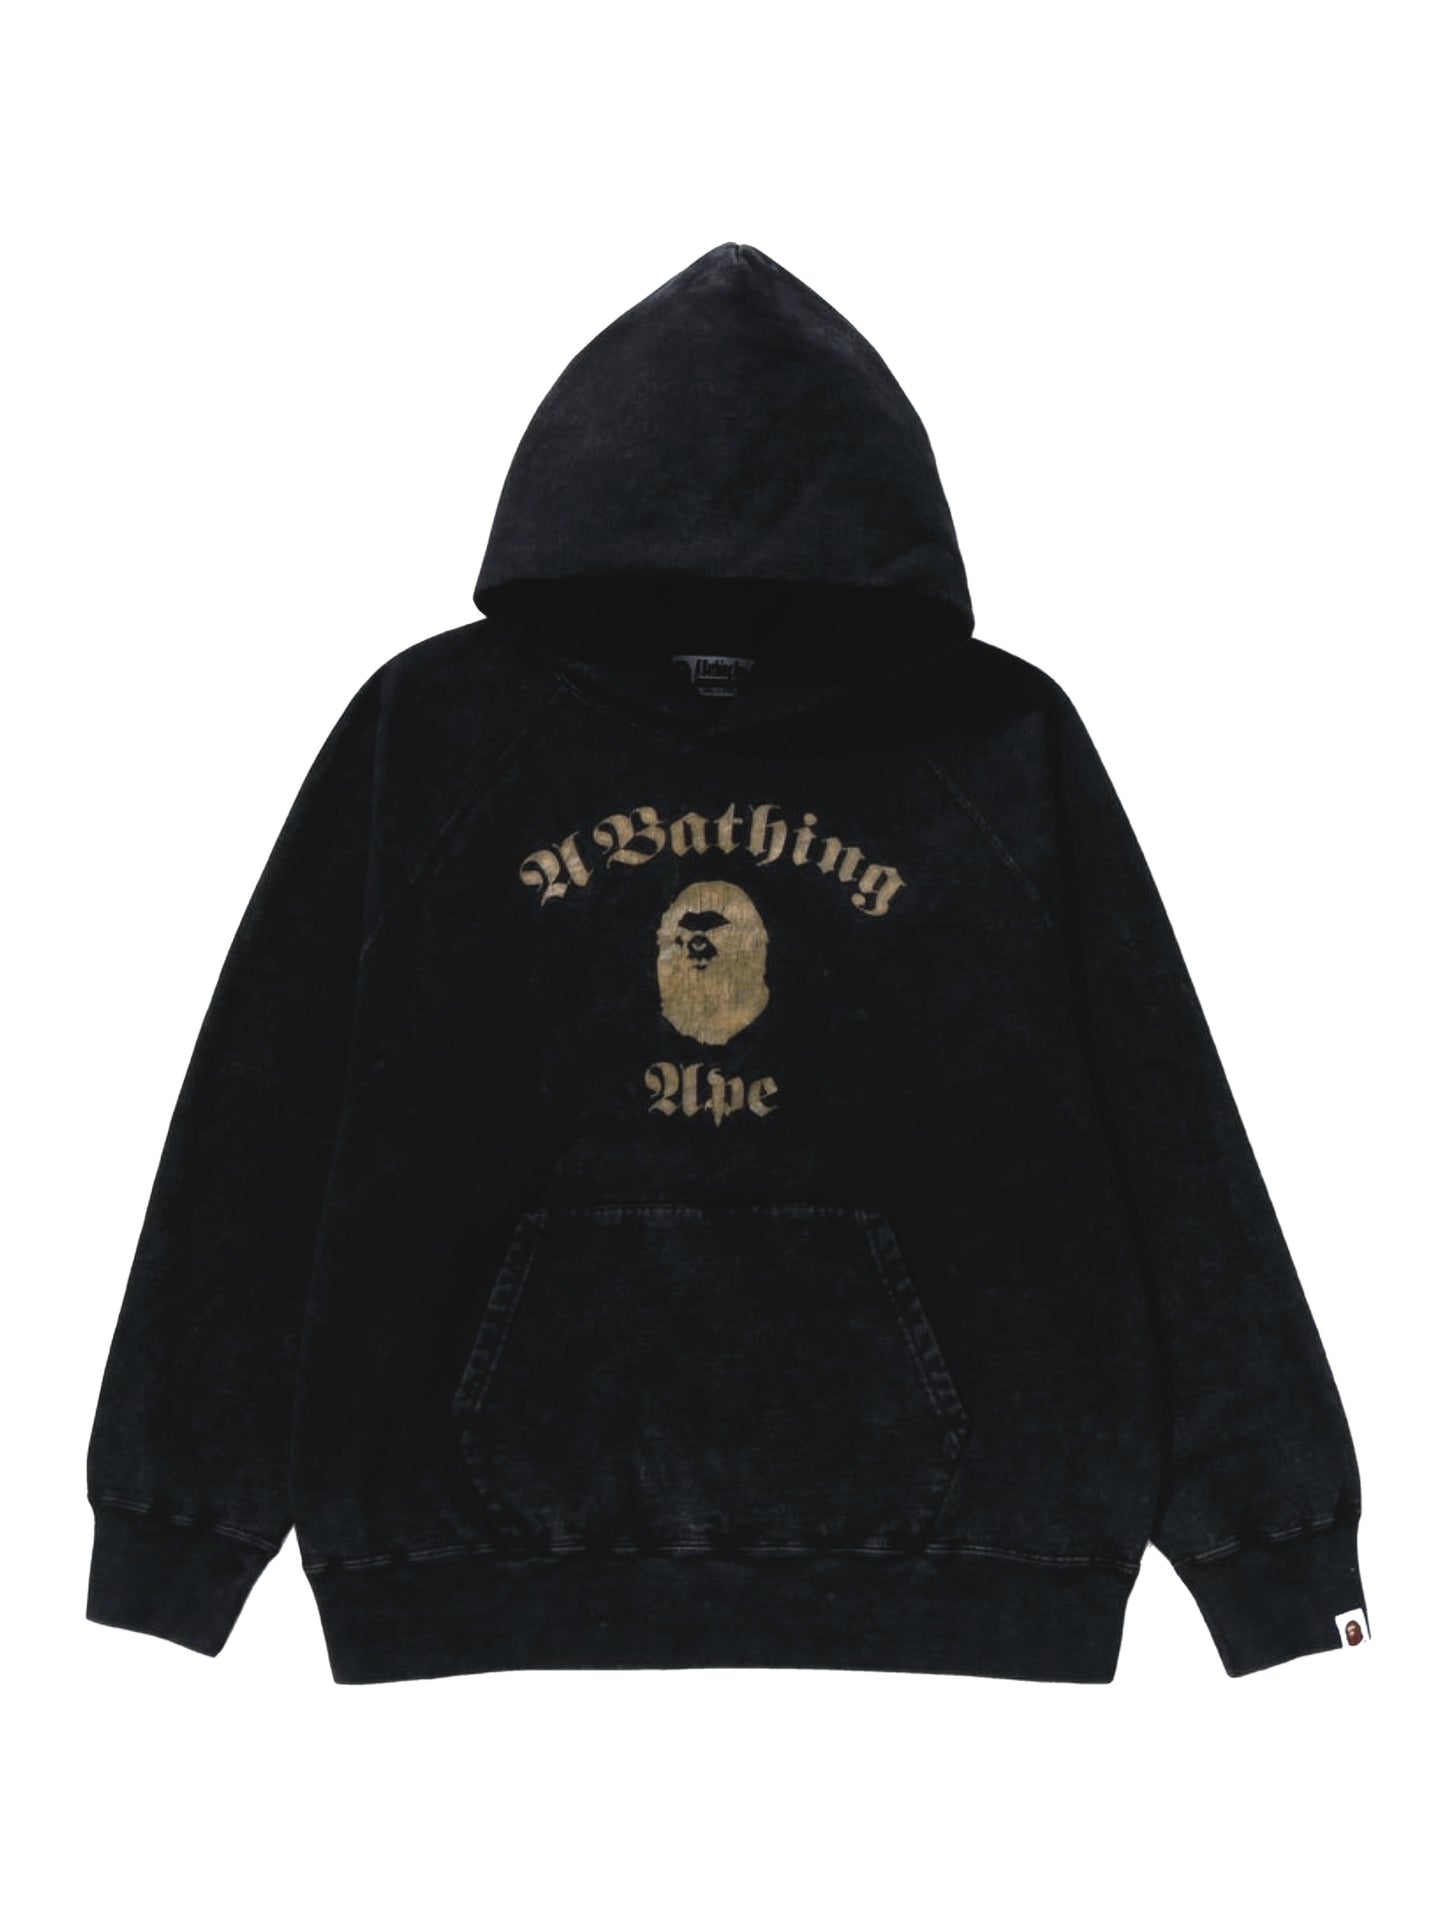 A Bathing Ape Overdye Pullover Relaxed Fit Hoodie Black